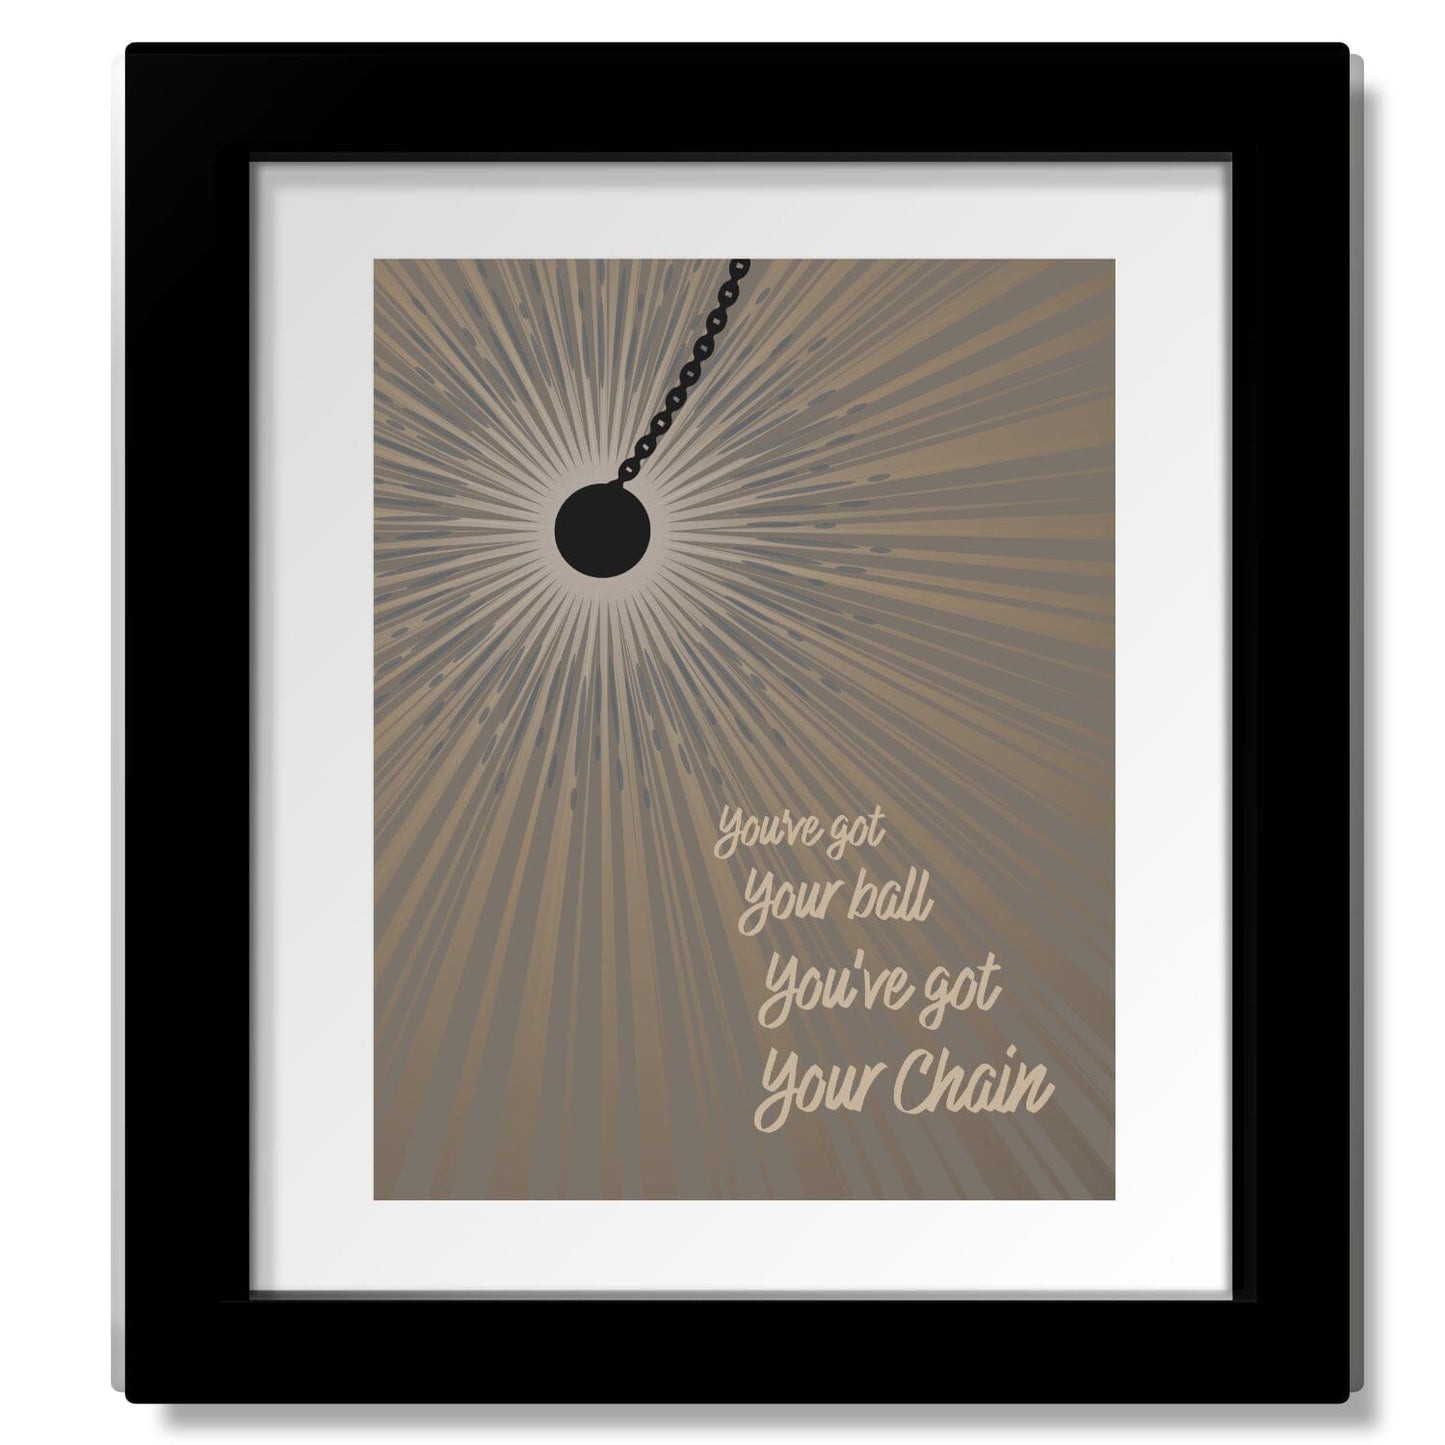 Crash into Me by Dave Matthews Band - Song Lyric Print Art Song Lyrics Art Song Lyrics Art 8x10 Matted and Framed Print 